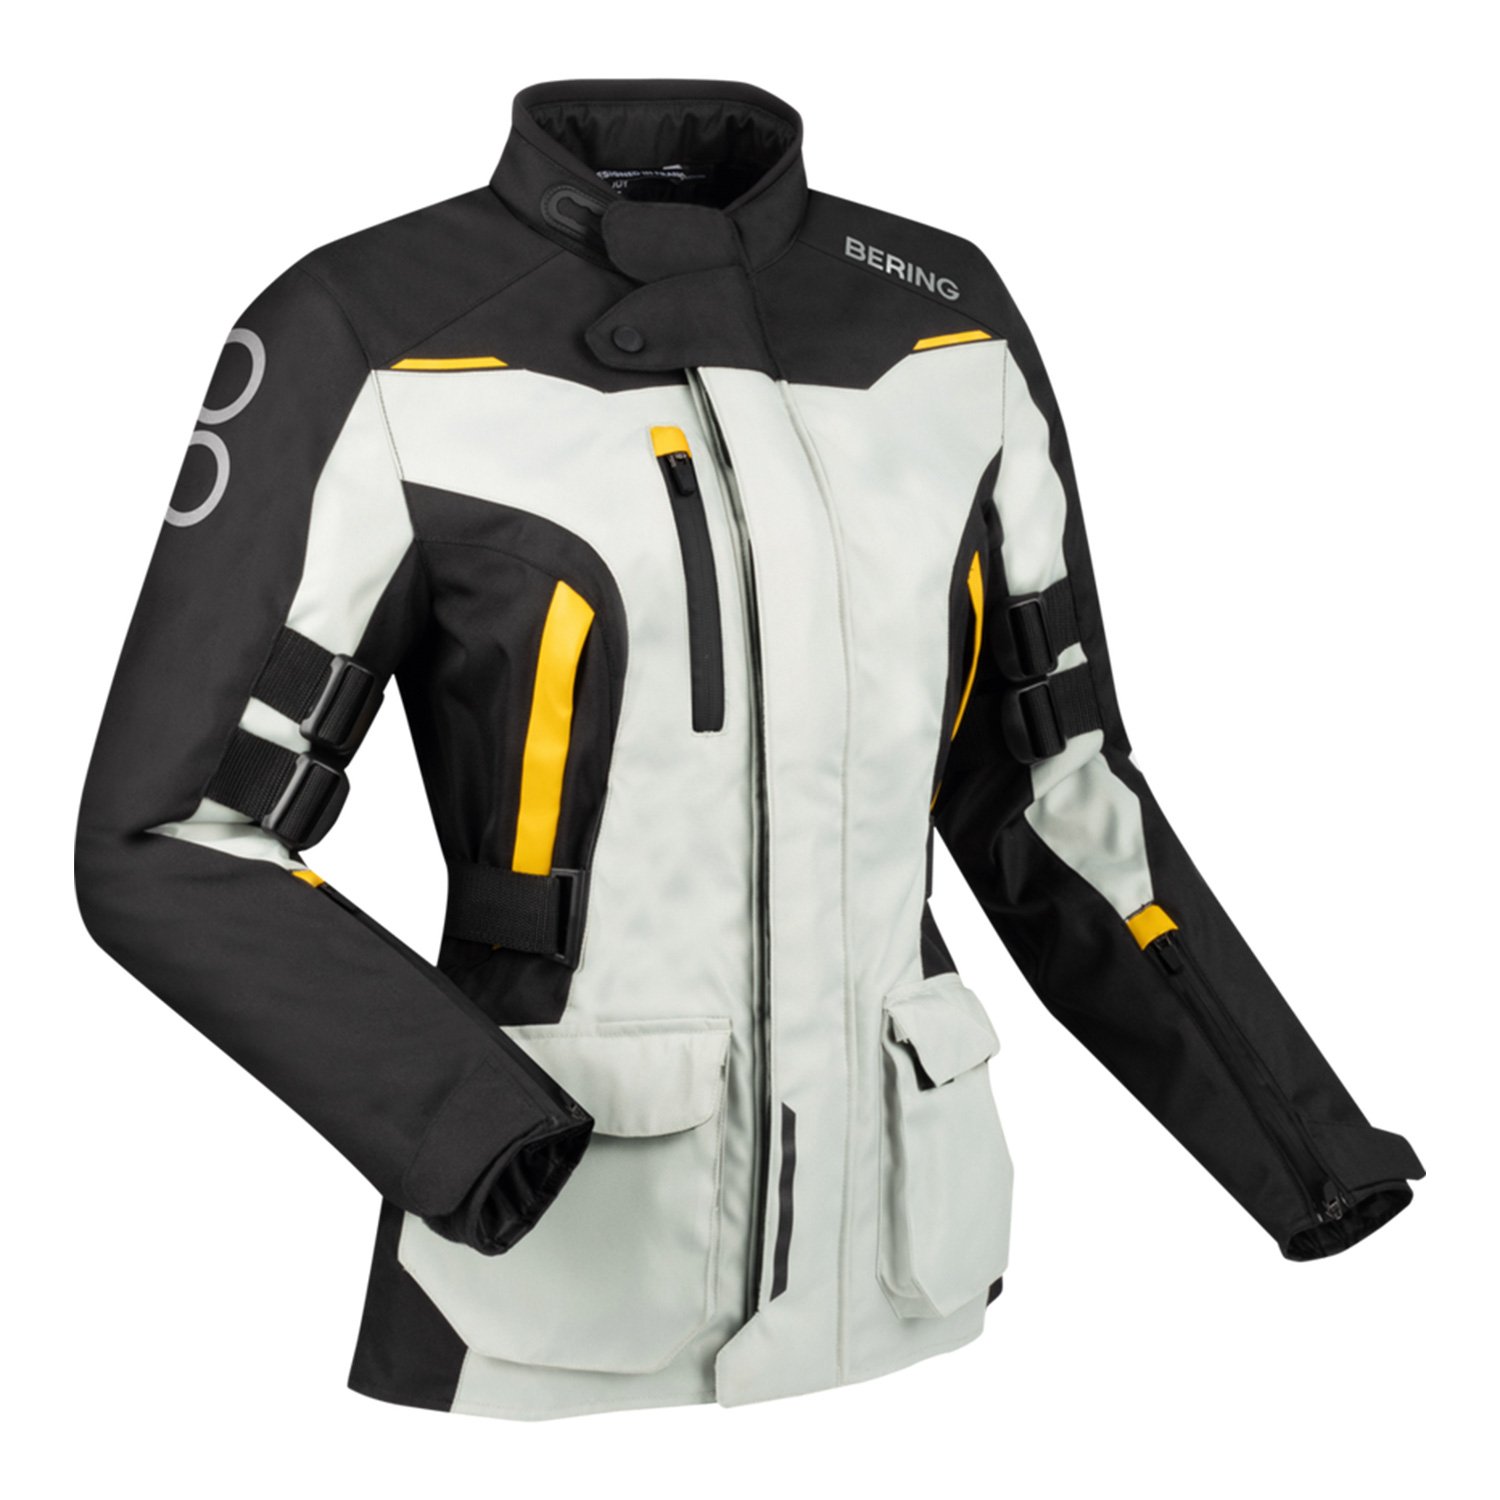 Image of Bering Lady Zephyr Jacket Black Grey Yellow Taille T6